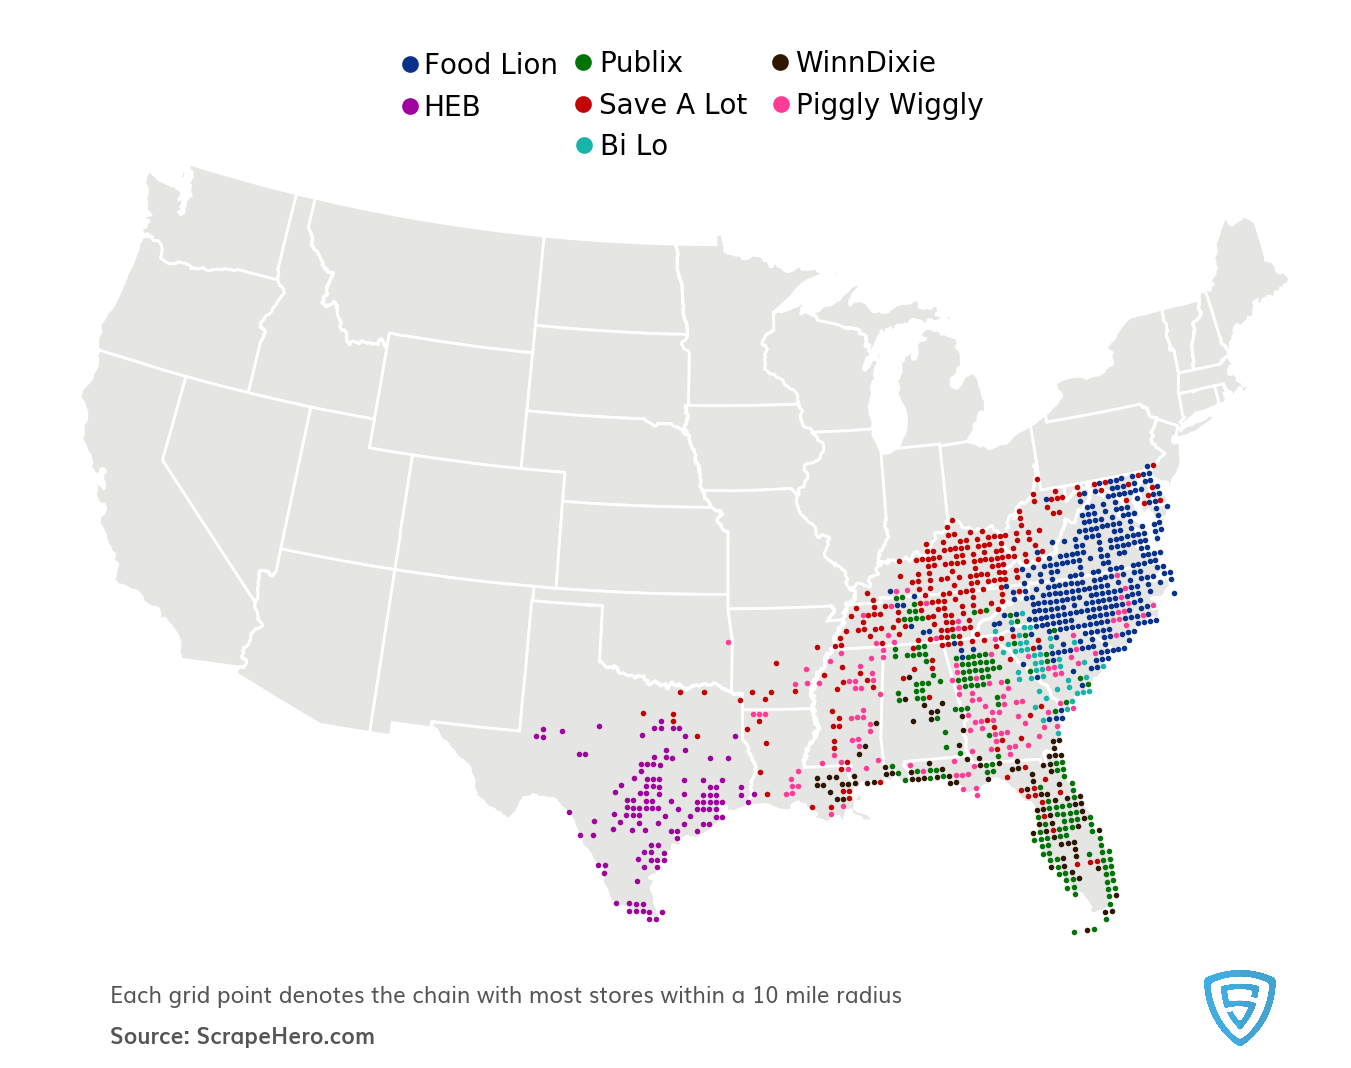 Popular us grocery stores